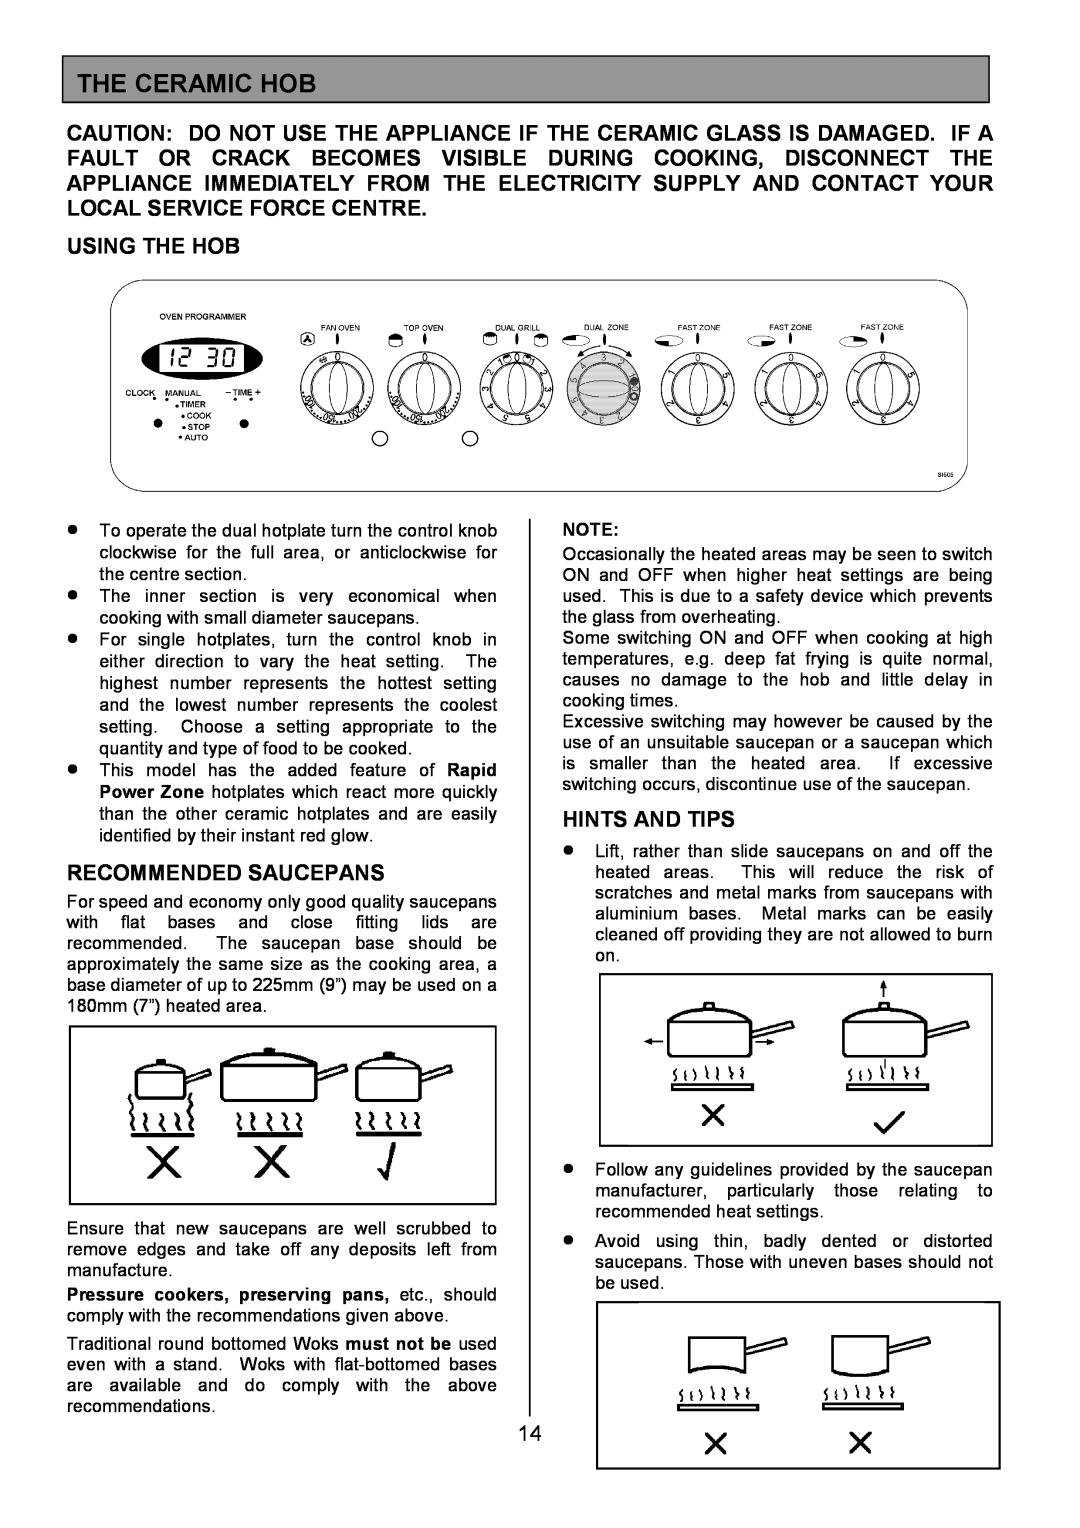 Tricity Bendix SI505 installation instructions The Ceramic Hob, Using The Hob, Recommended Saucepans, Hints And Tips 